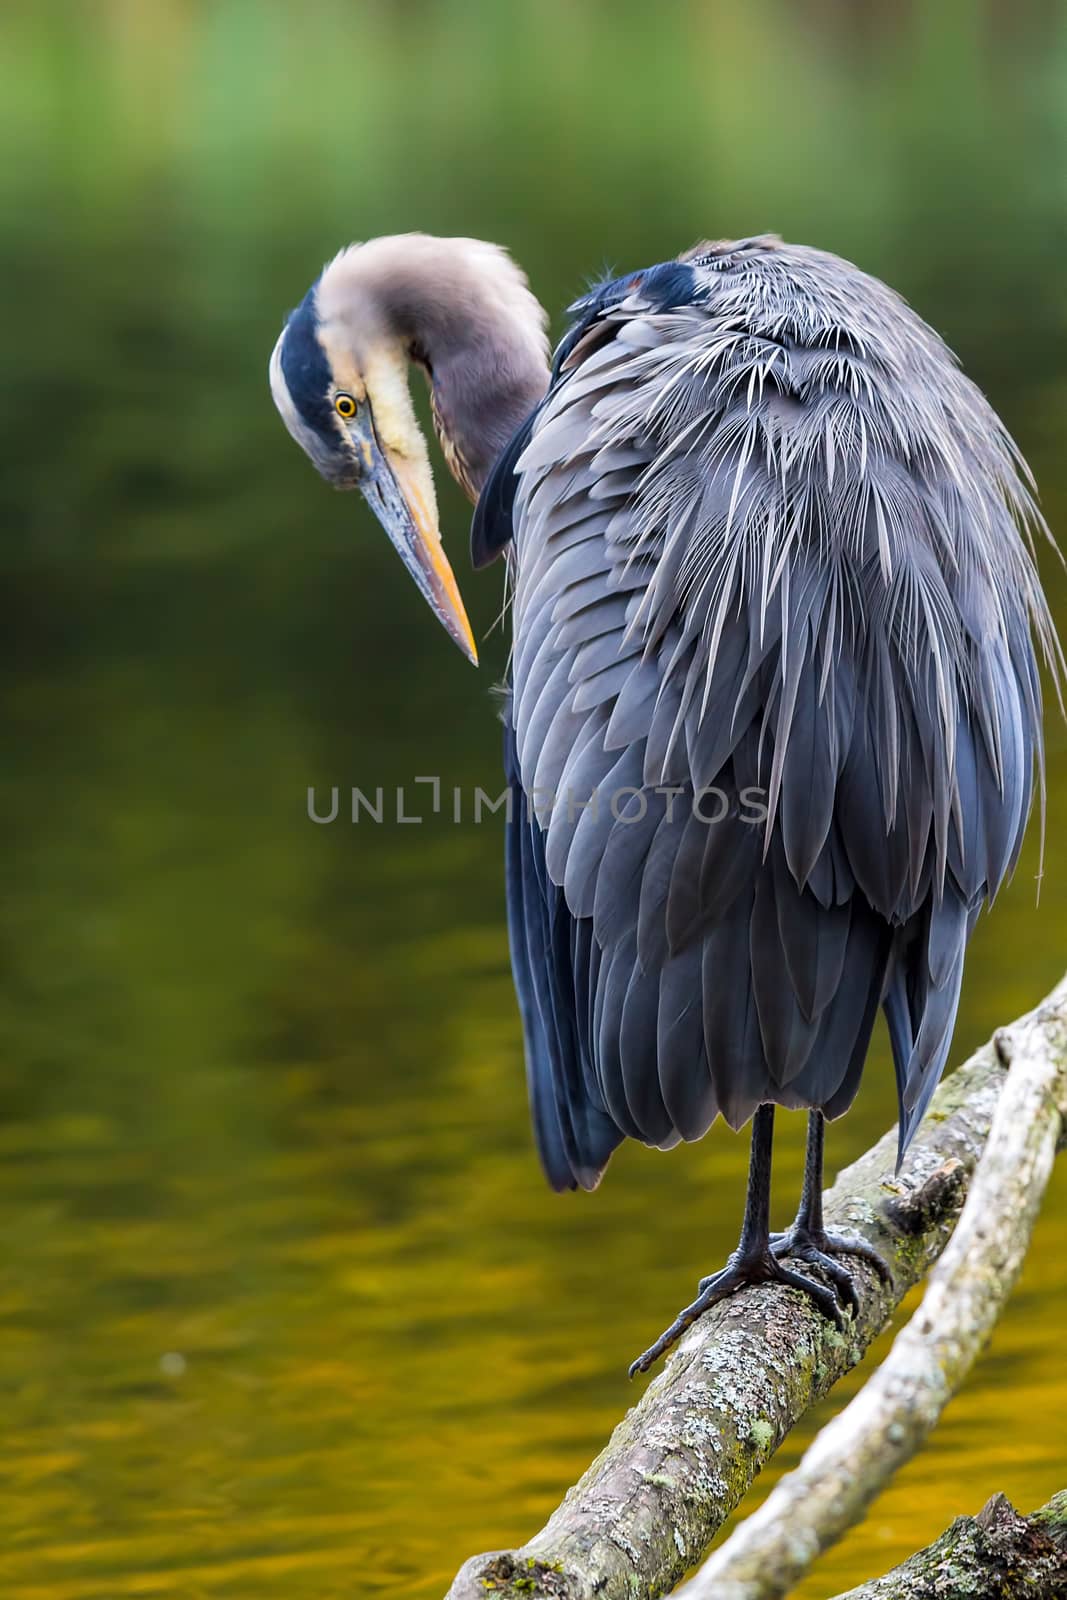 The Great Blue Heron perched on a tree branch preening by the lake at Crystal Springs Rhododendron Garden in Portland Oregon